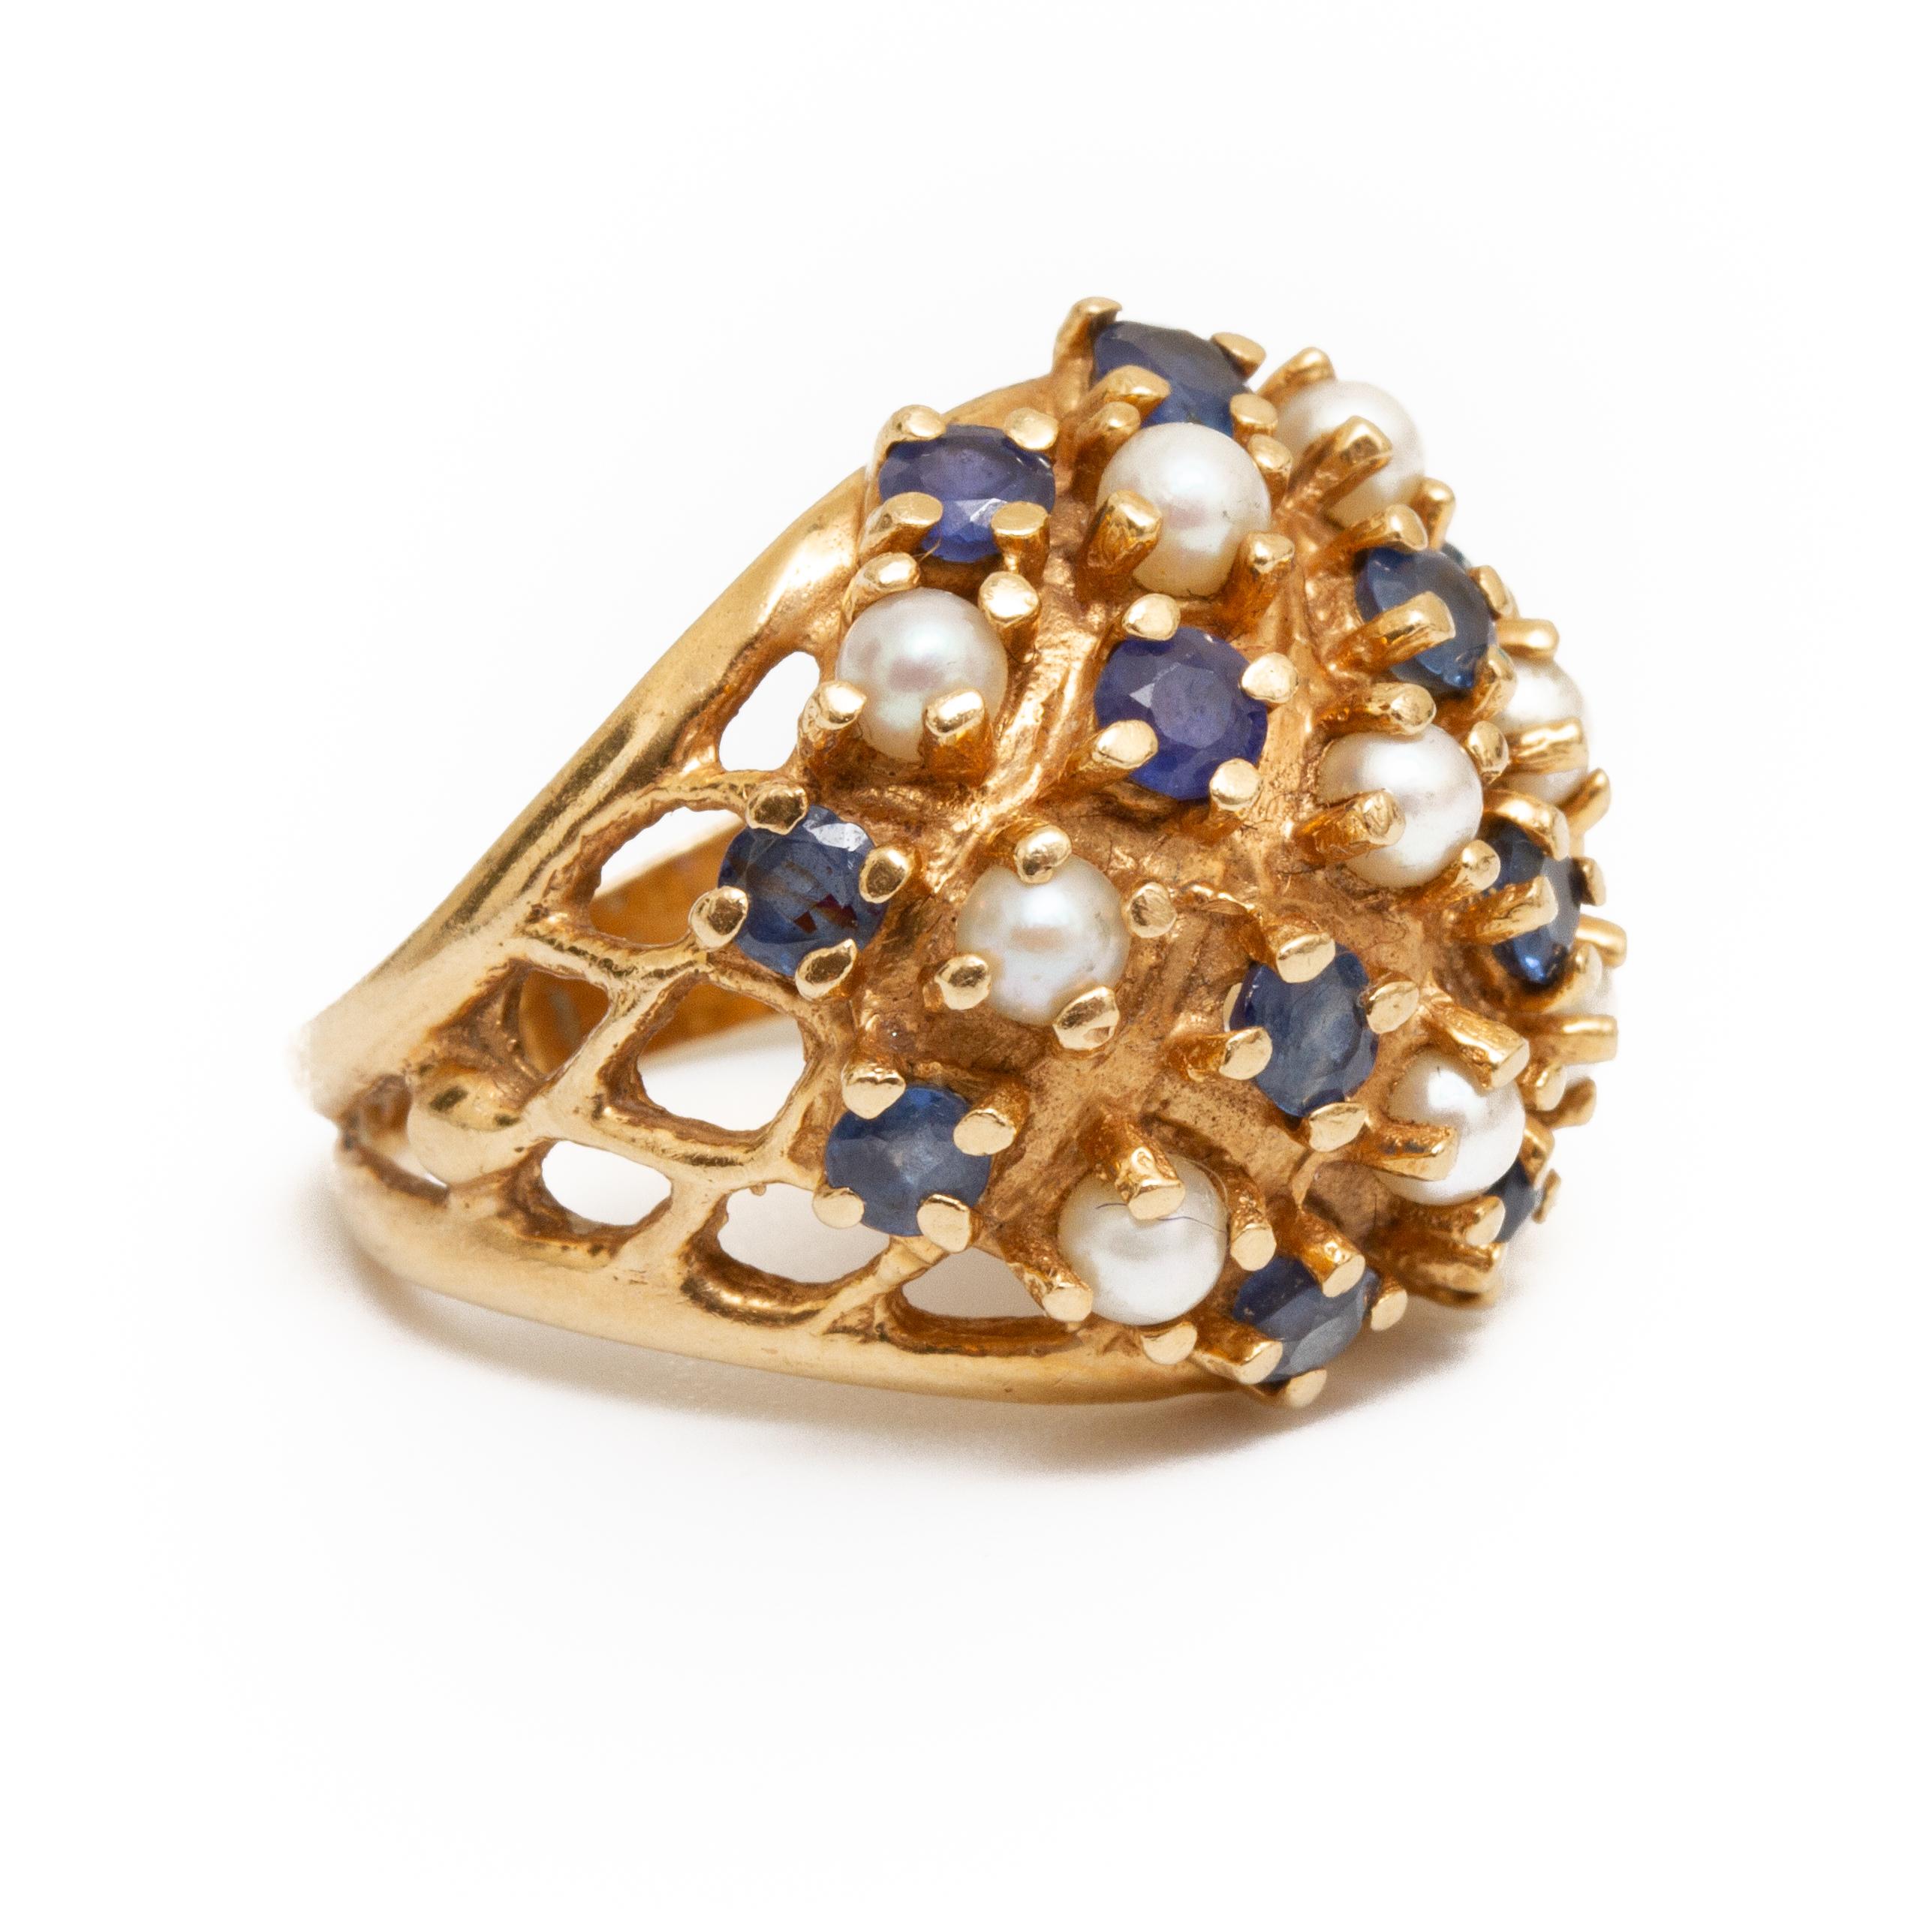 14k gold ring mounted with sapphires and seed pearls size 5.25. Weight approx. 4.8 dwt. From the Broussard estate noted jewelry collection Park Avenue New York